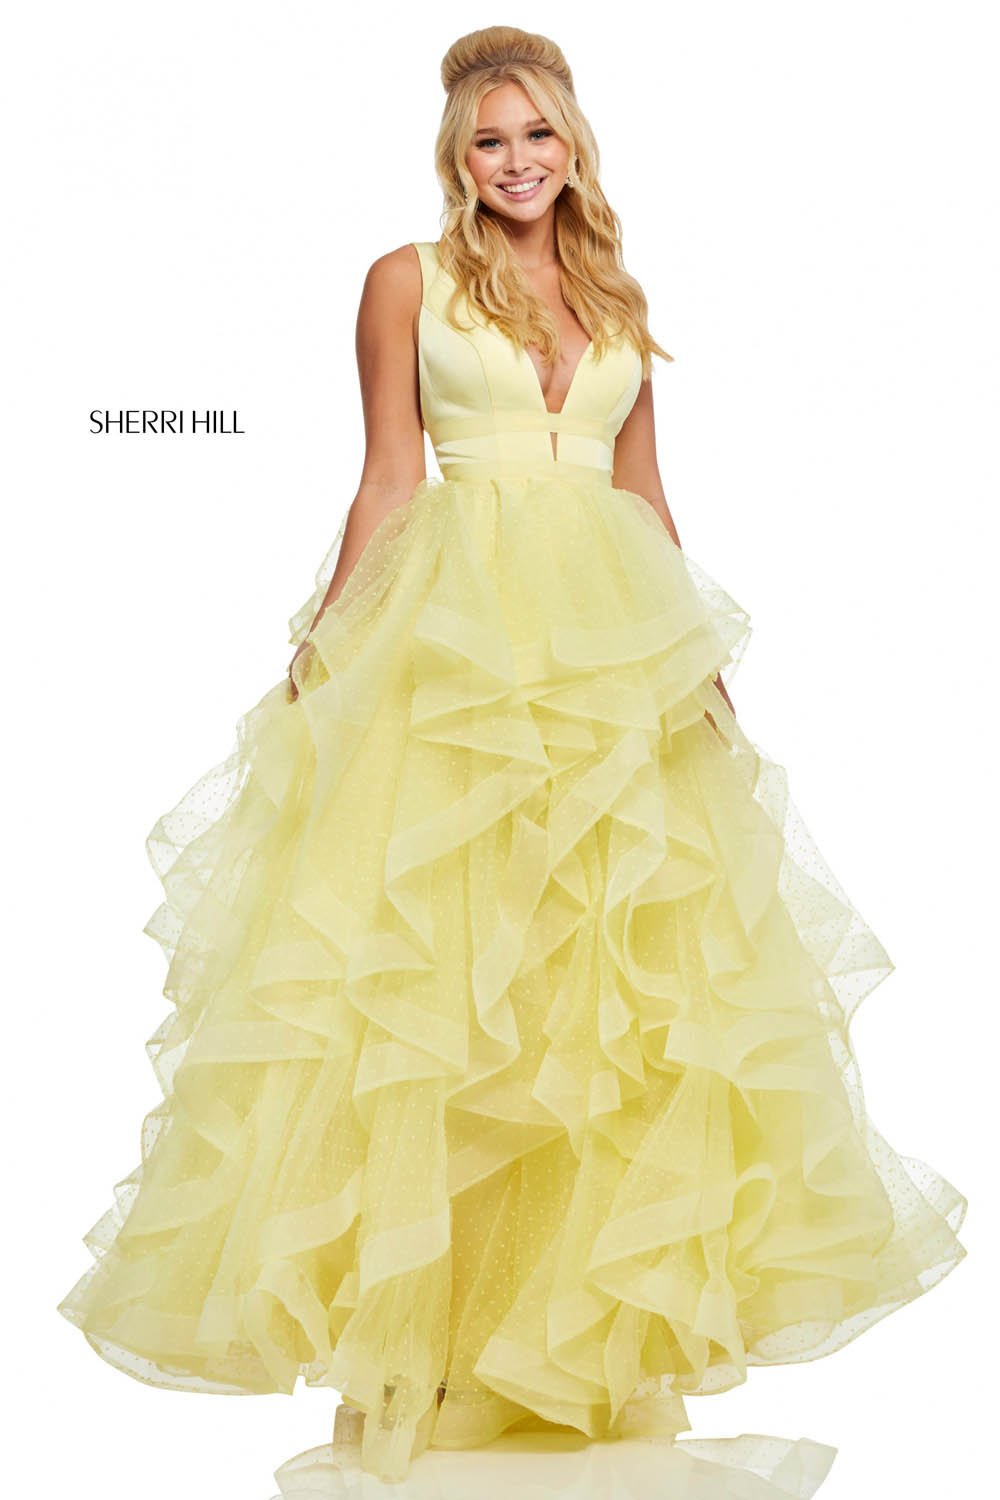 Sherri Hill 52691 dress images in these colors: Light Blue, Yellow, Ivory, Black, Blush, Navy.